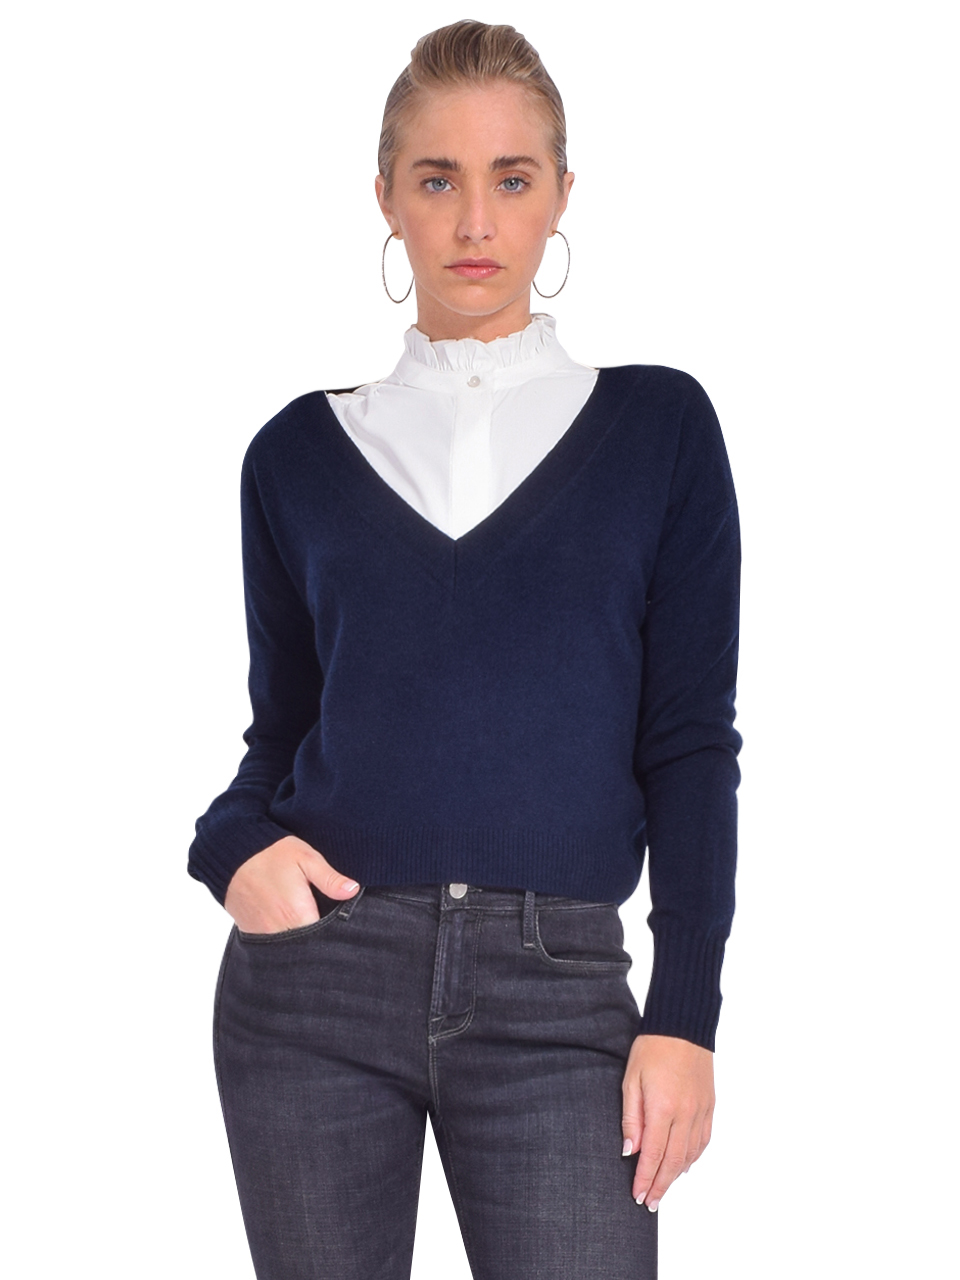 SERRA The Easy V-Neck Pullover in Navy Blue Front View 